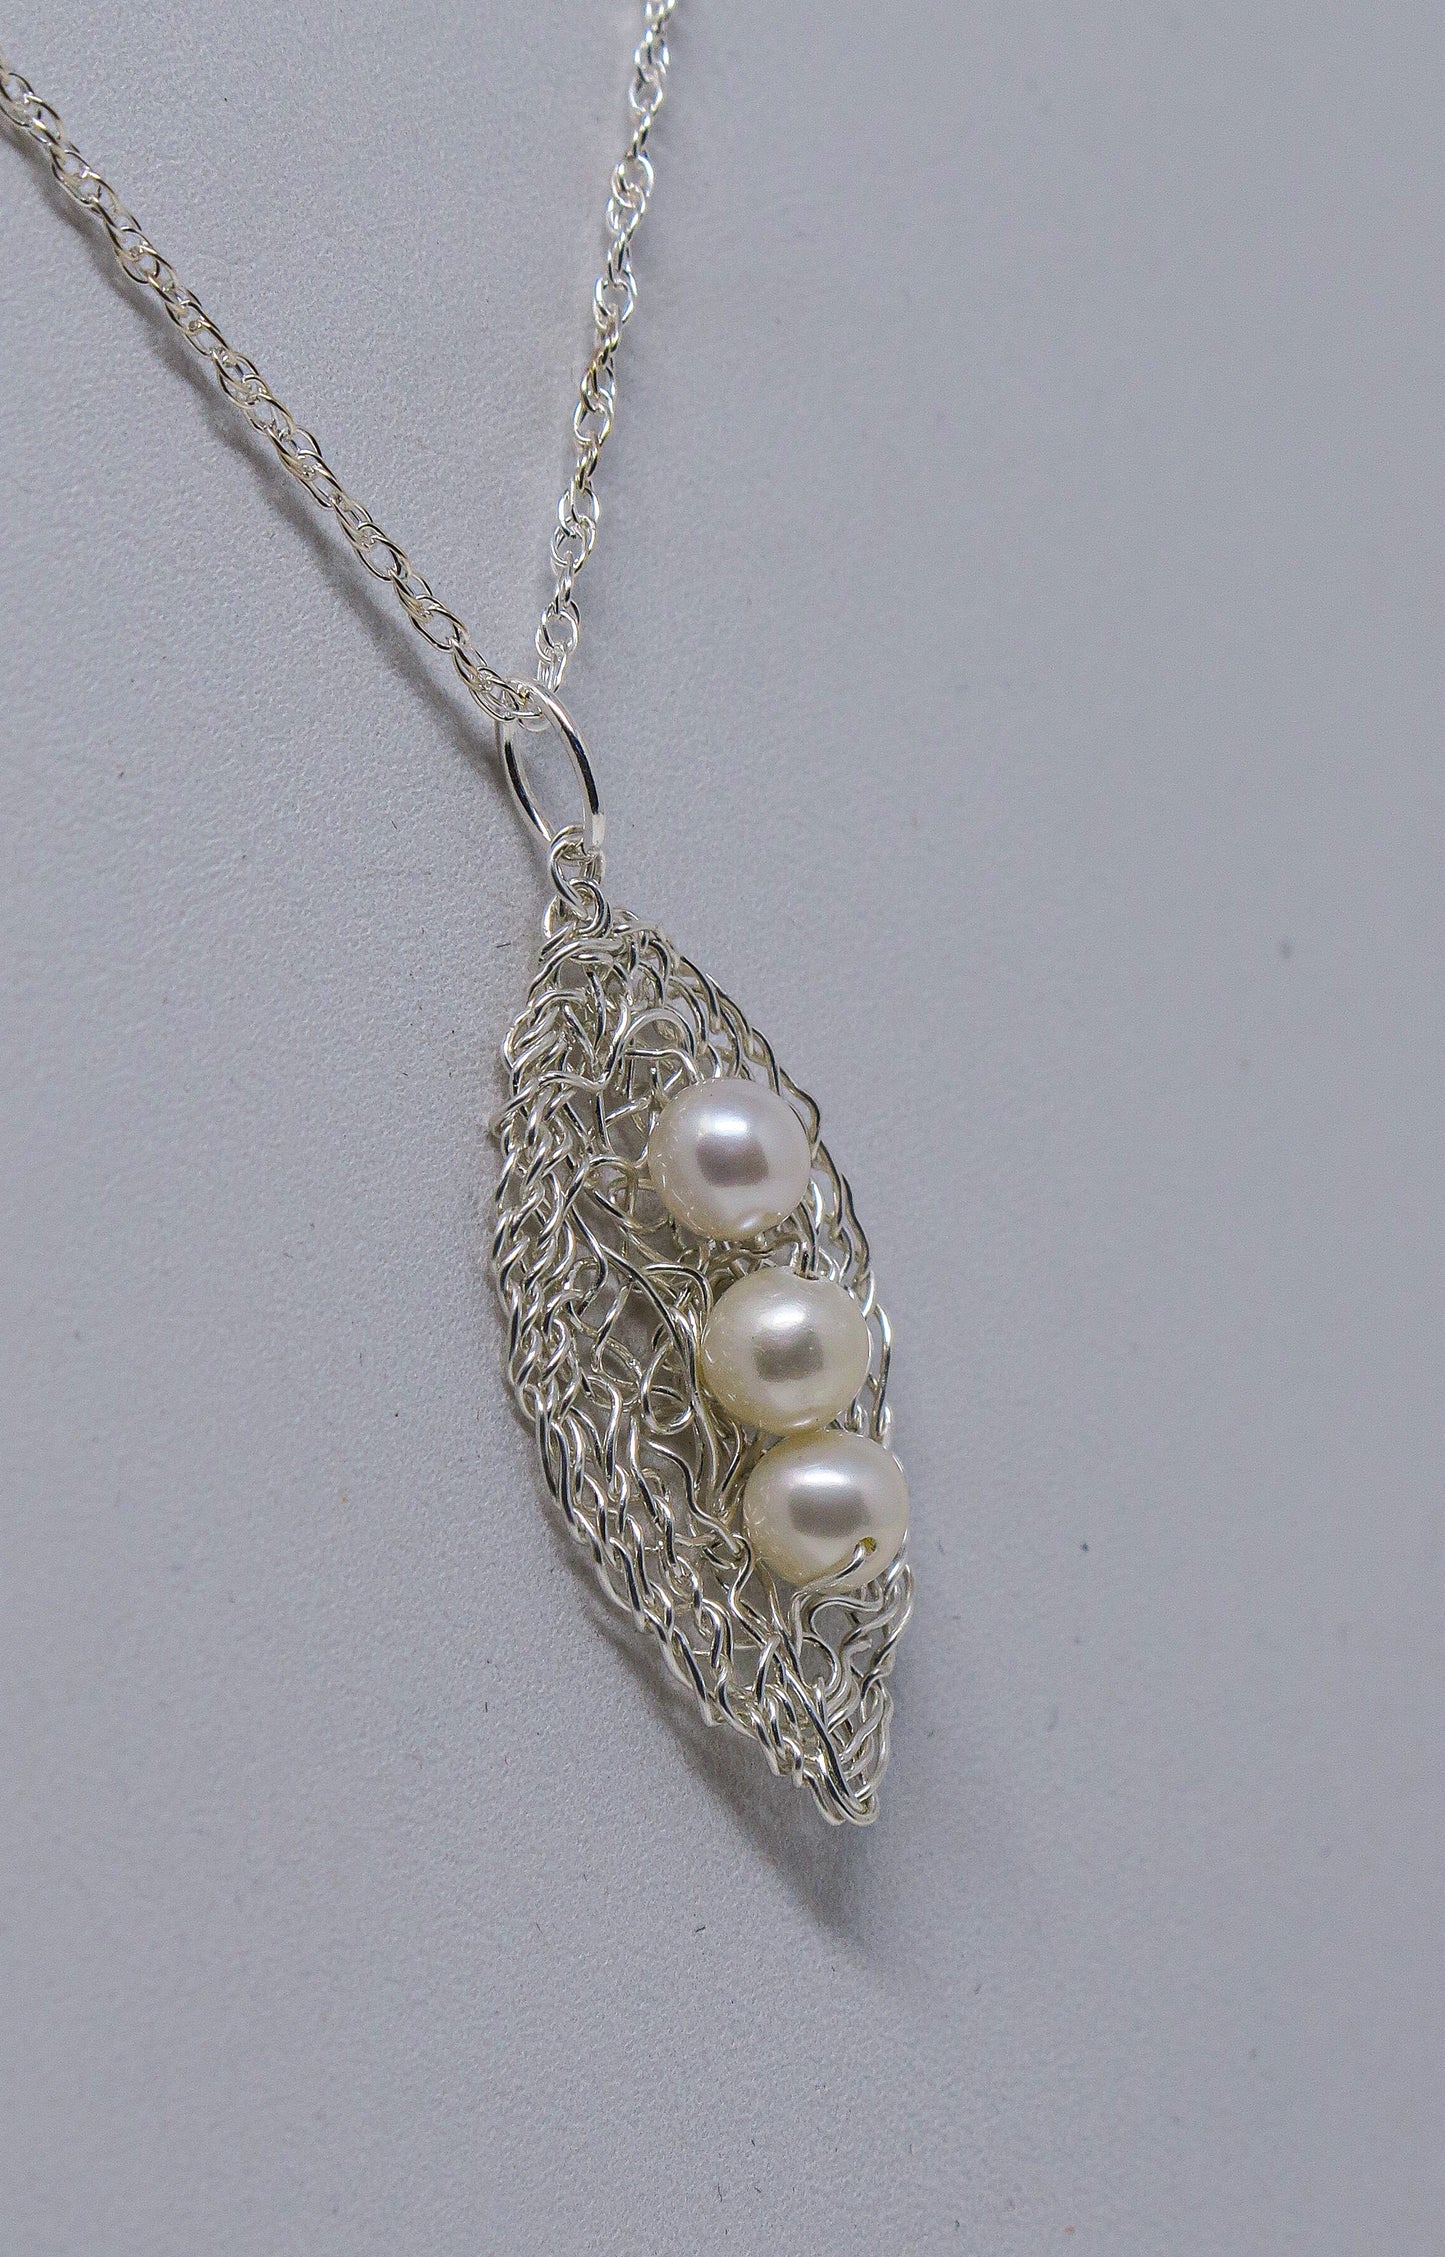 Fine ‘Small leaf with Three Peas in a Pod' Silver Pendant with Pearls on a 925 Silver Chain | by Kathryn Stanko